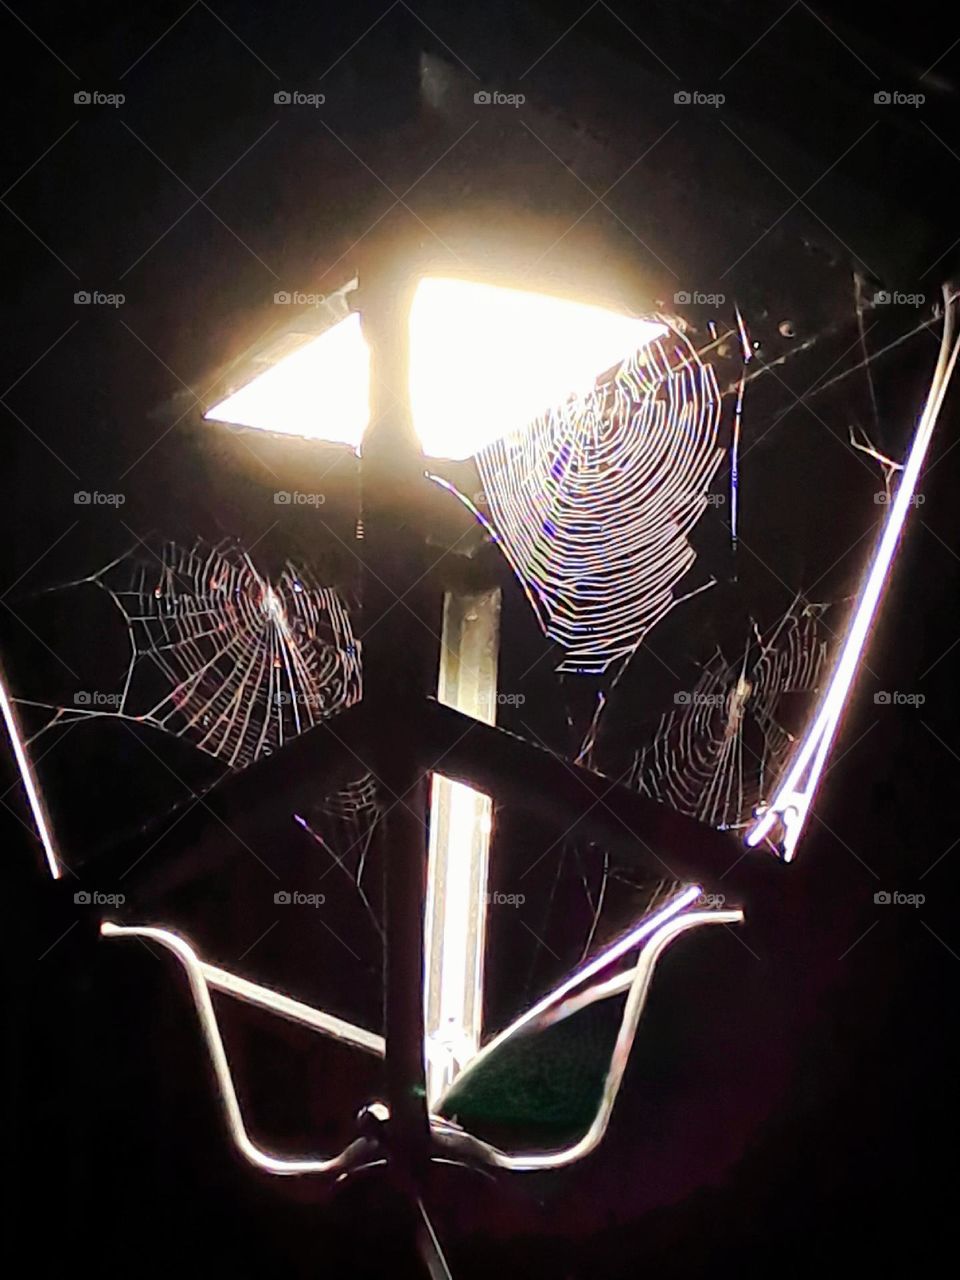 projecting Spider webs